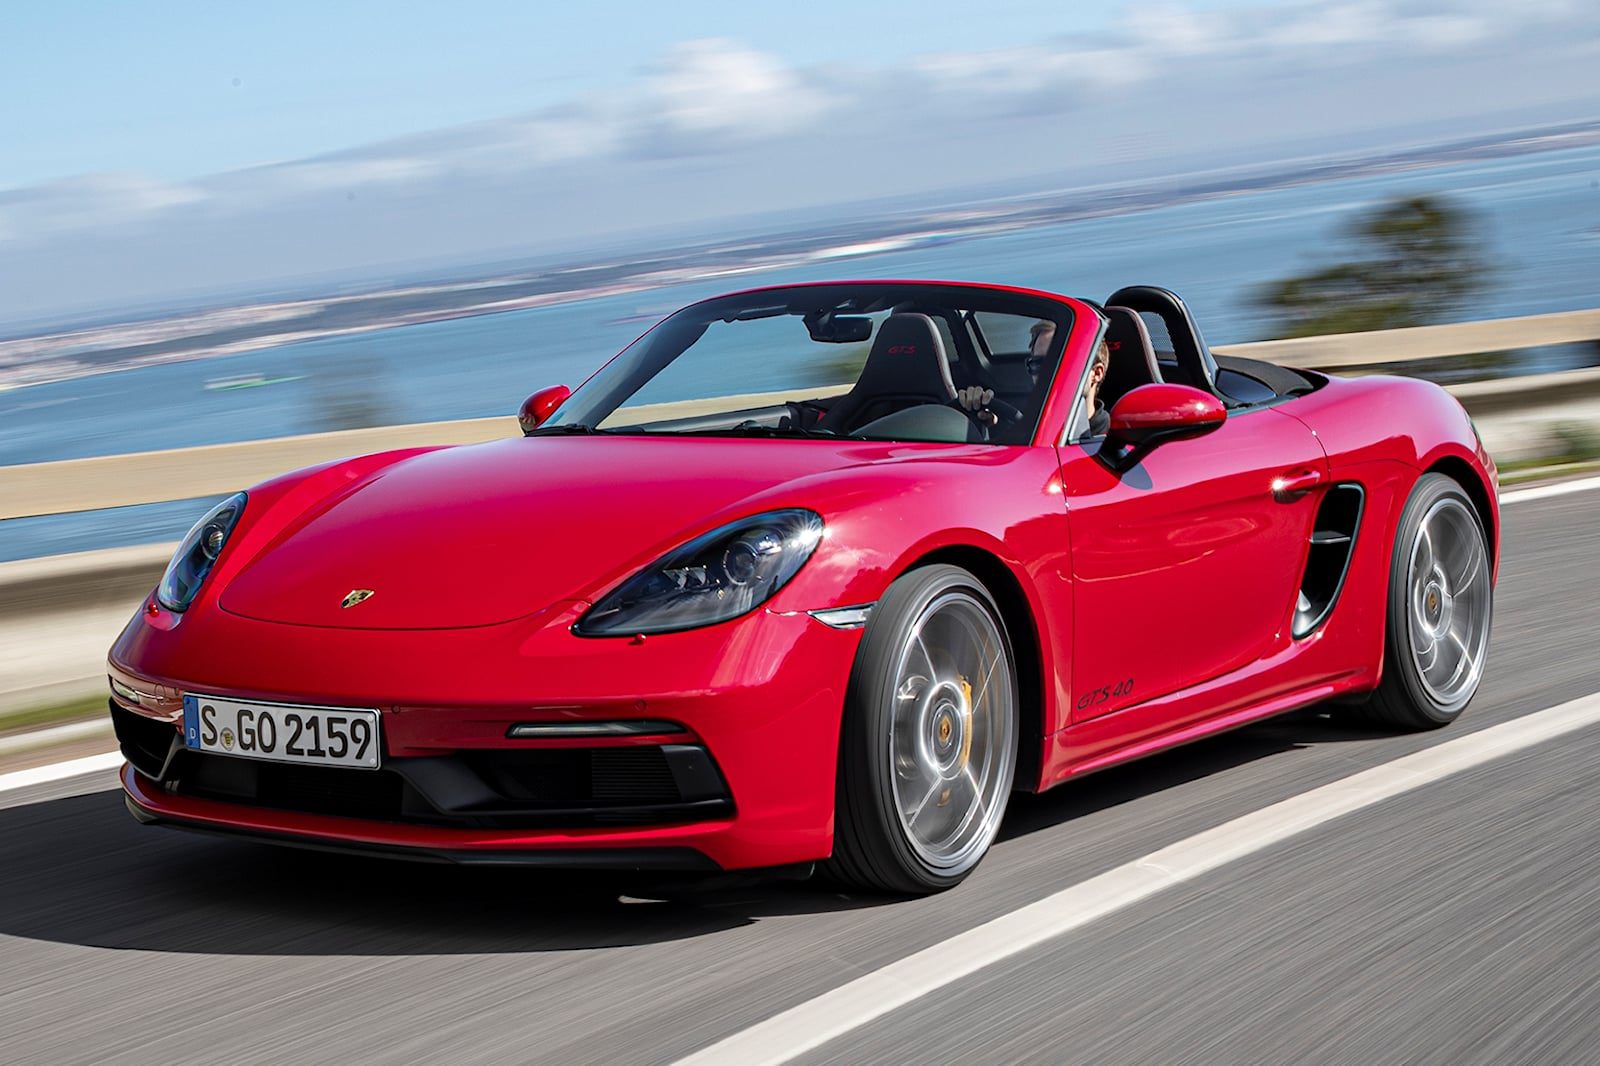 Front-angled view of a red Porsche 718 Boxster.